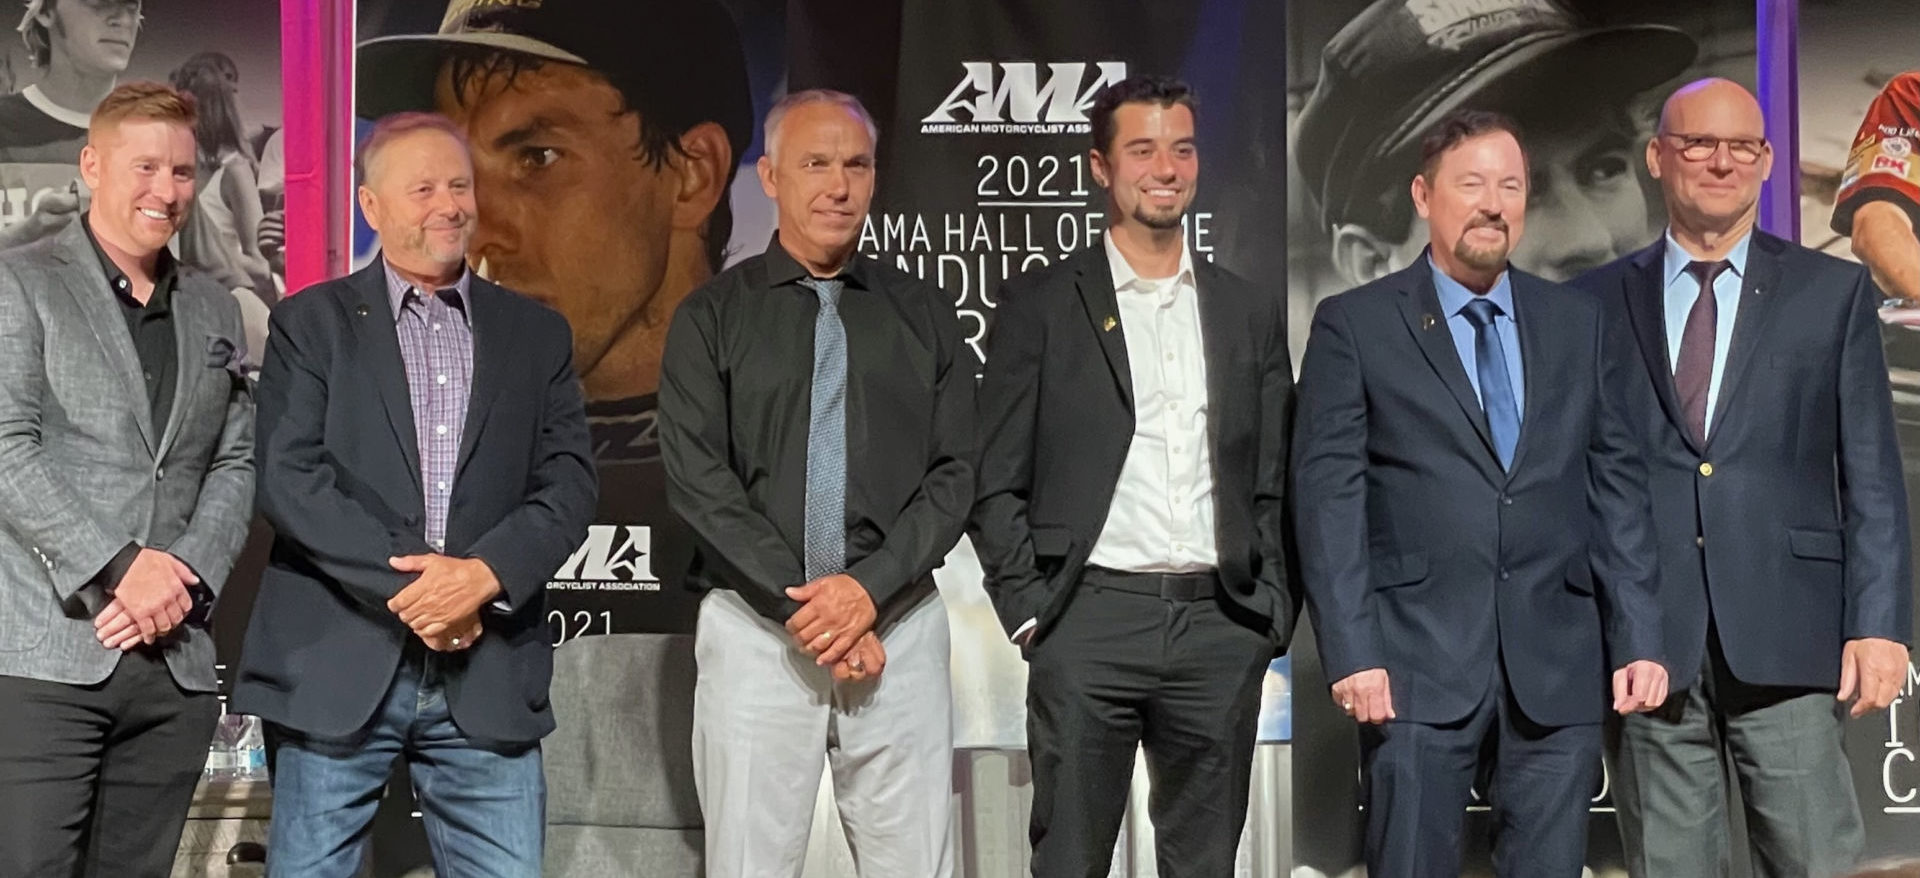 Part of the AMA Motorcycle Hall of Fame Class of 2021: (from left) Ryan Villopoto, Kenny Tolbert, Scott Plessinger, Loretta Lynn's grandson Anthony Brutto, Gary Denton, and Dave Arnold. Photo courtesy AMA Motorcycle Hall of Fame.